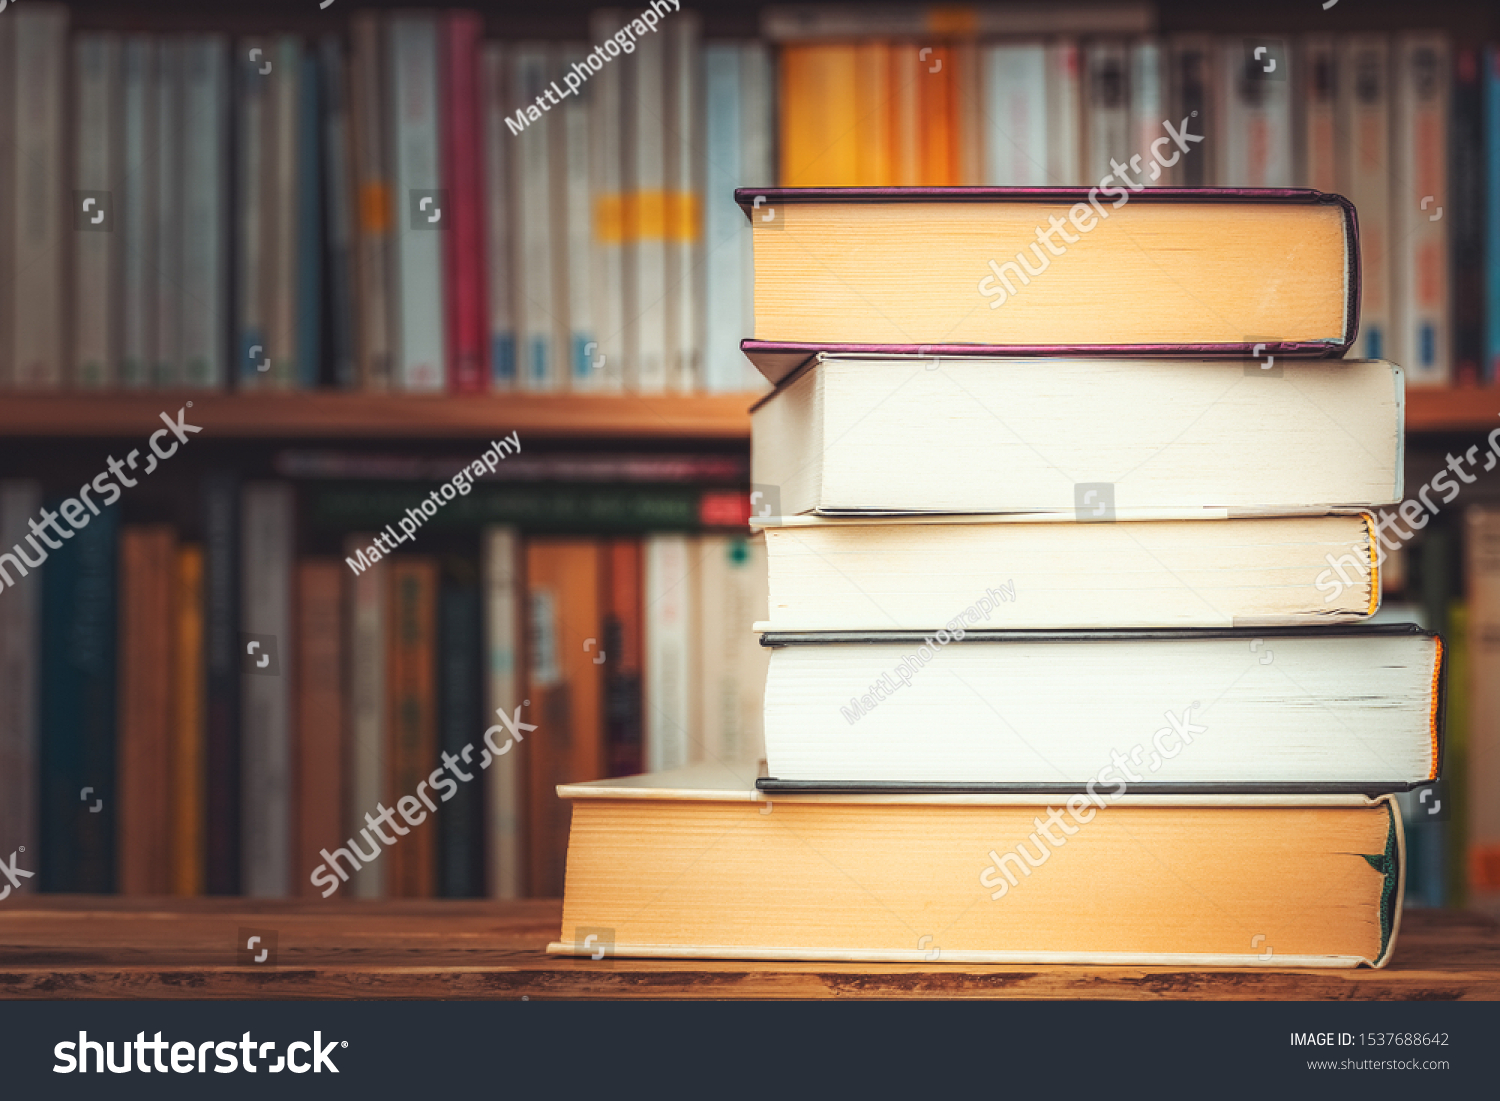 Pile of big books with blurry bookshelf in the background and copy space. Knowledge, reading, study, literacy or literature illustrative concept. #1537688642